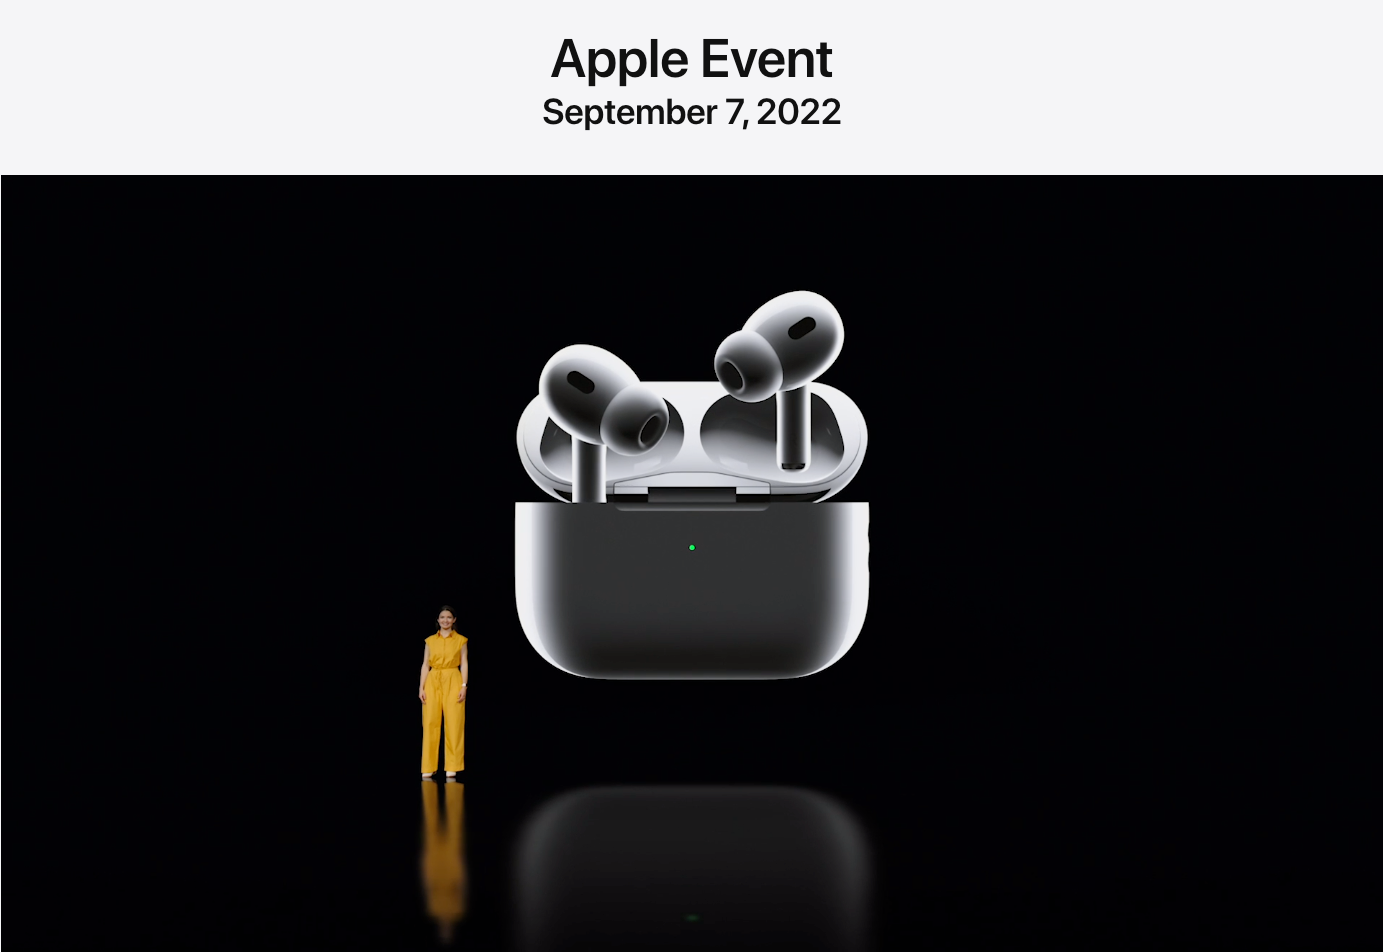 Everything I Found Out About The New H2 Chip From AirPods Pro 2 | by Jakub  Jirak | Predict | Medium